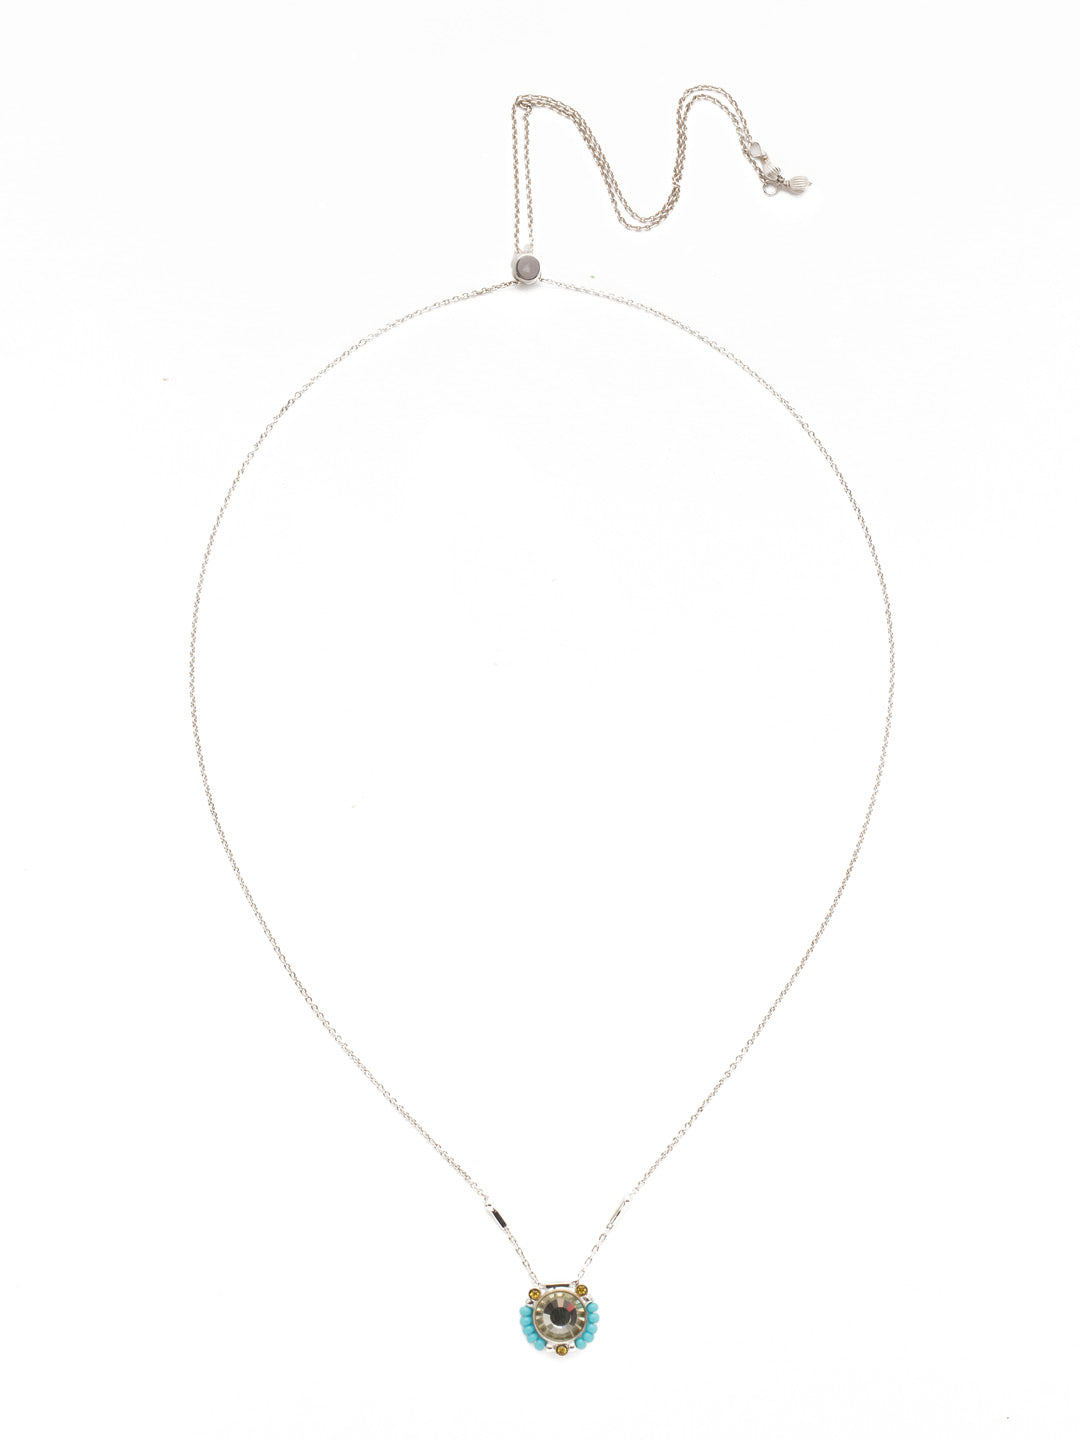 Ebe Classic Necklace - NEH9RHTHT - <p>A crystal center is encircled by handcrafted beadwork on a delicate metal slider chain. From Sorrelli's Tahitian Treat collection in our Palladium Silver-tone finish.</p>